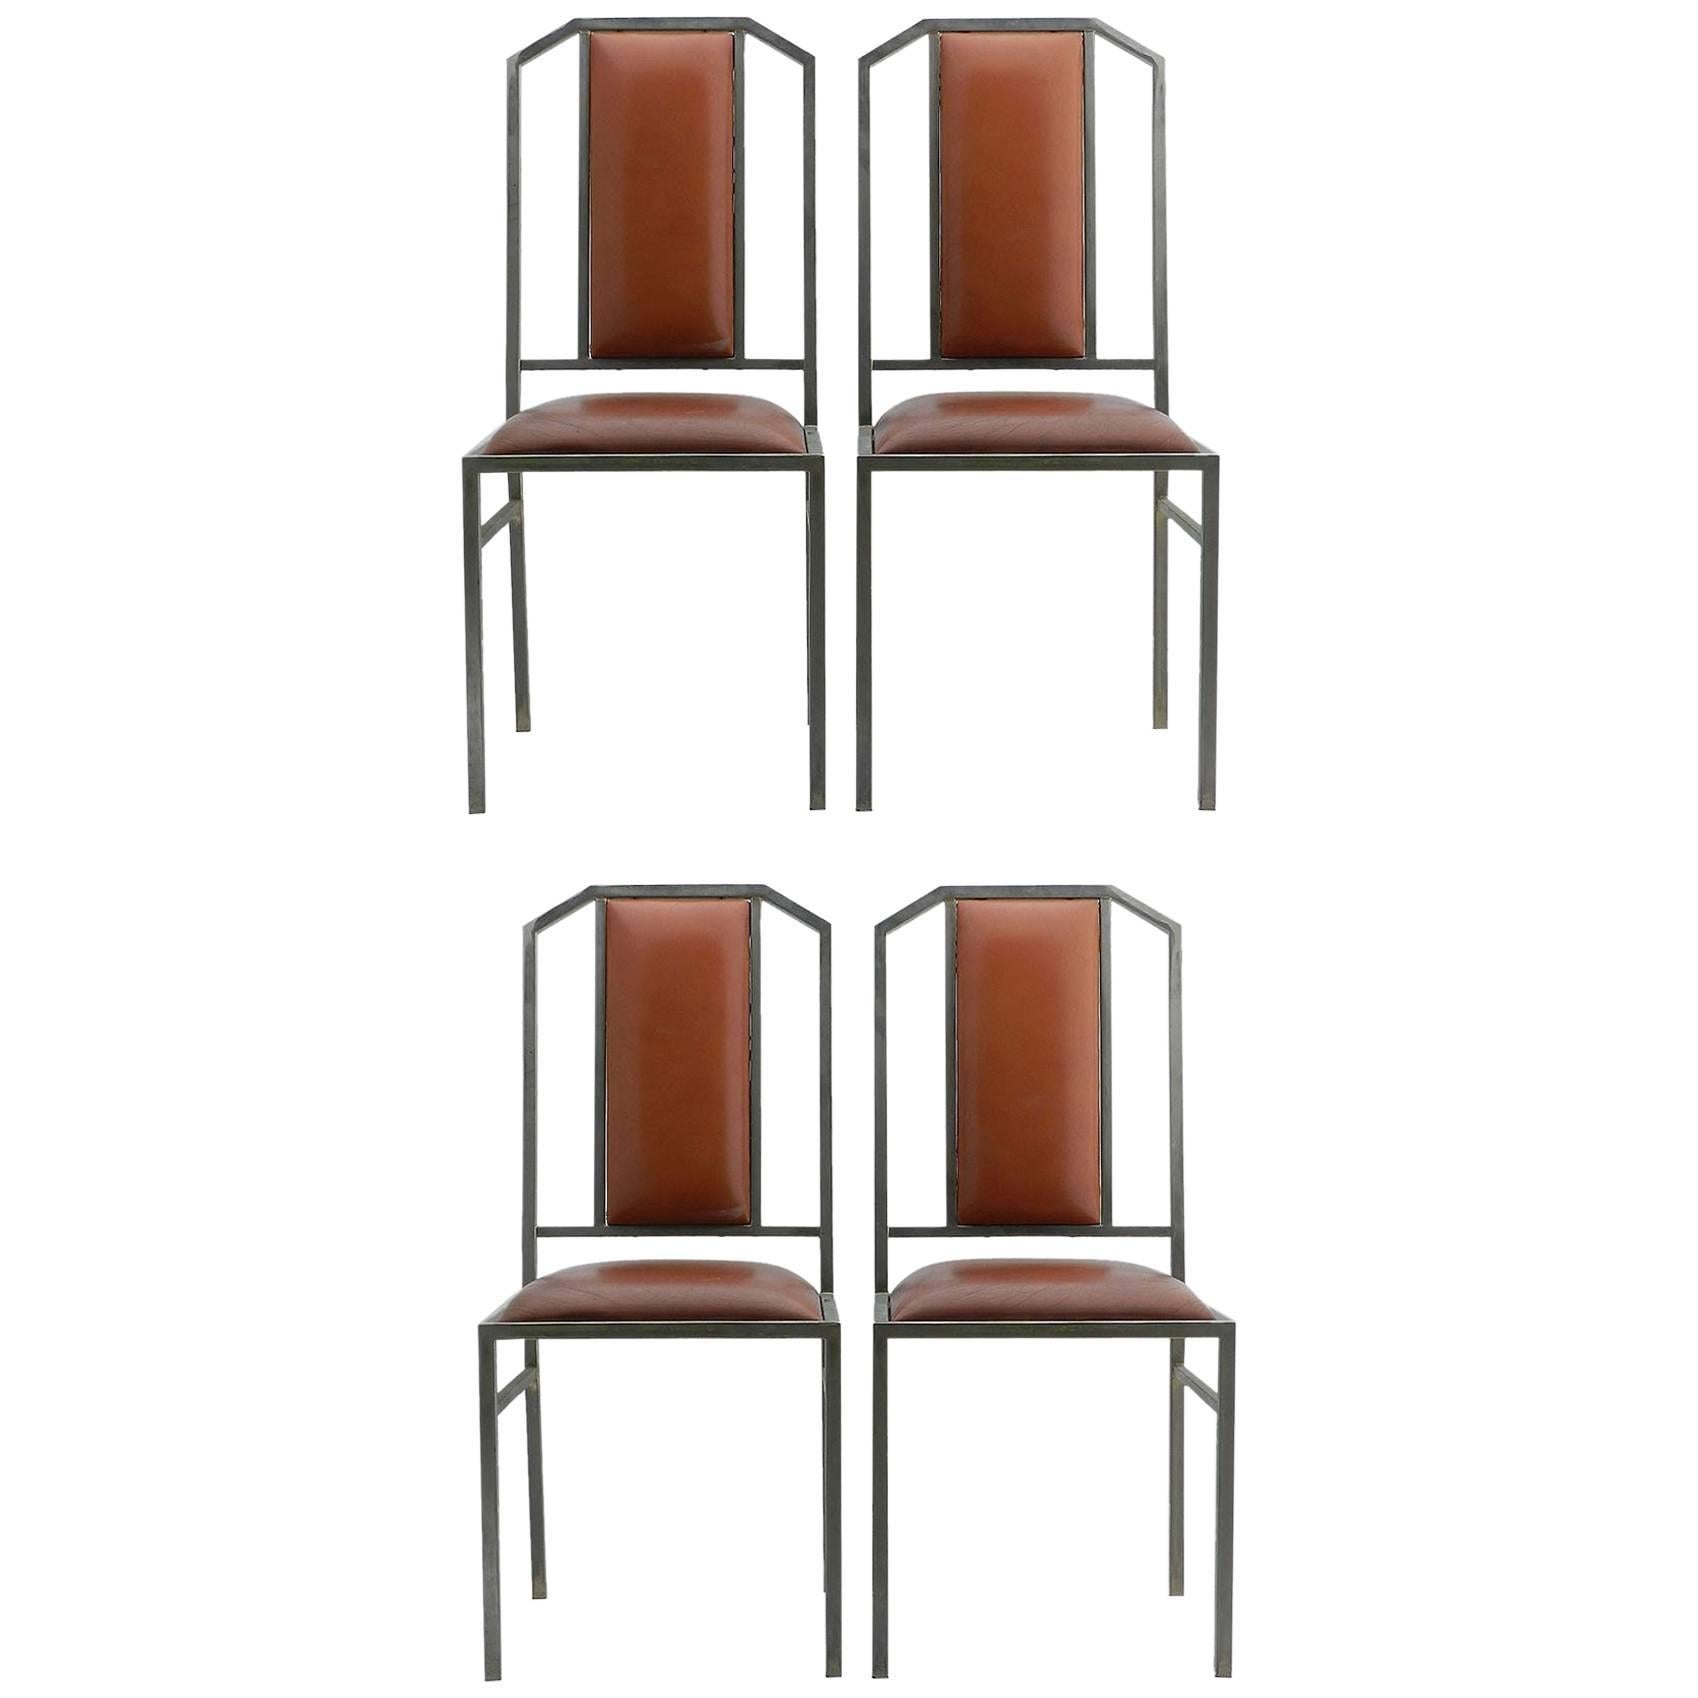 Four Maison Jansen dining chairs to be sold individually
All original with mid tan leather 
Brushed chrome on metal 
Very good condition for their age they have some signs of age
There are losses to the chrome on two of the chairs
Please look